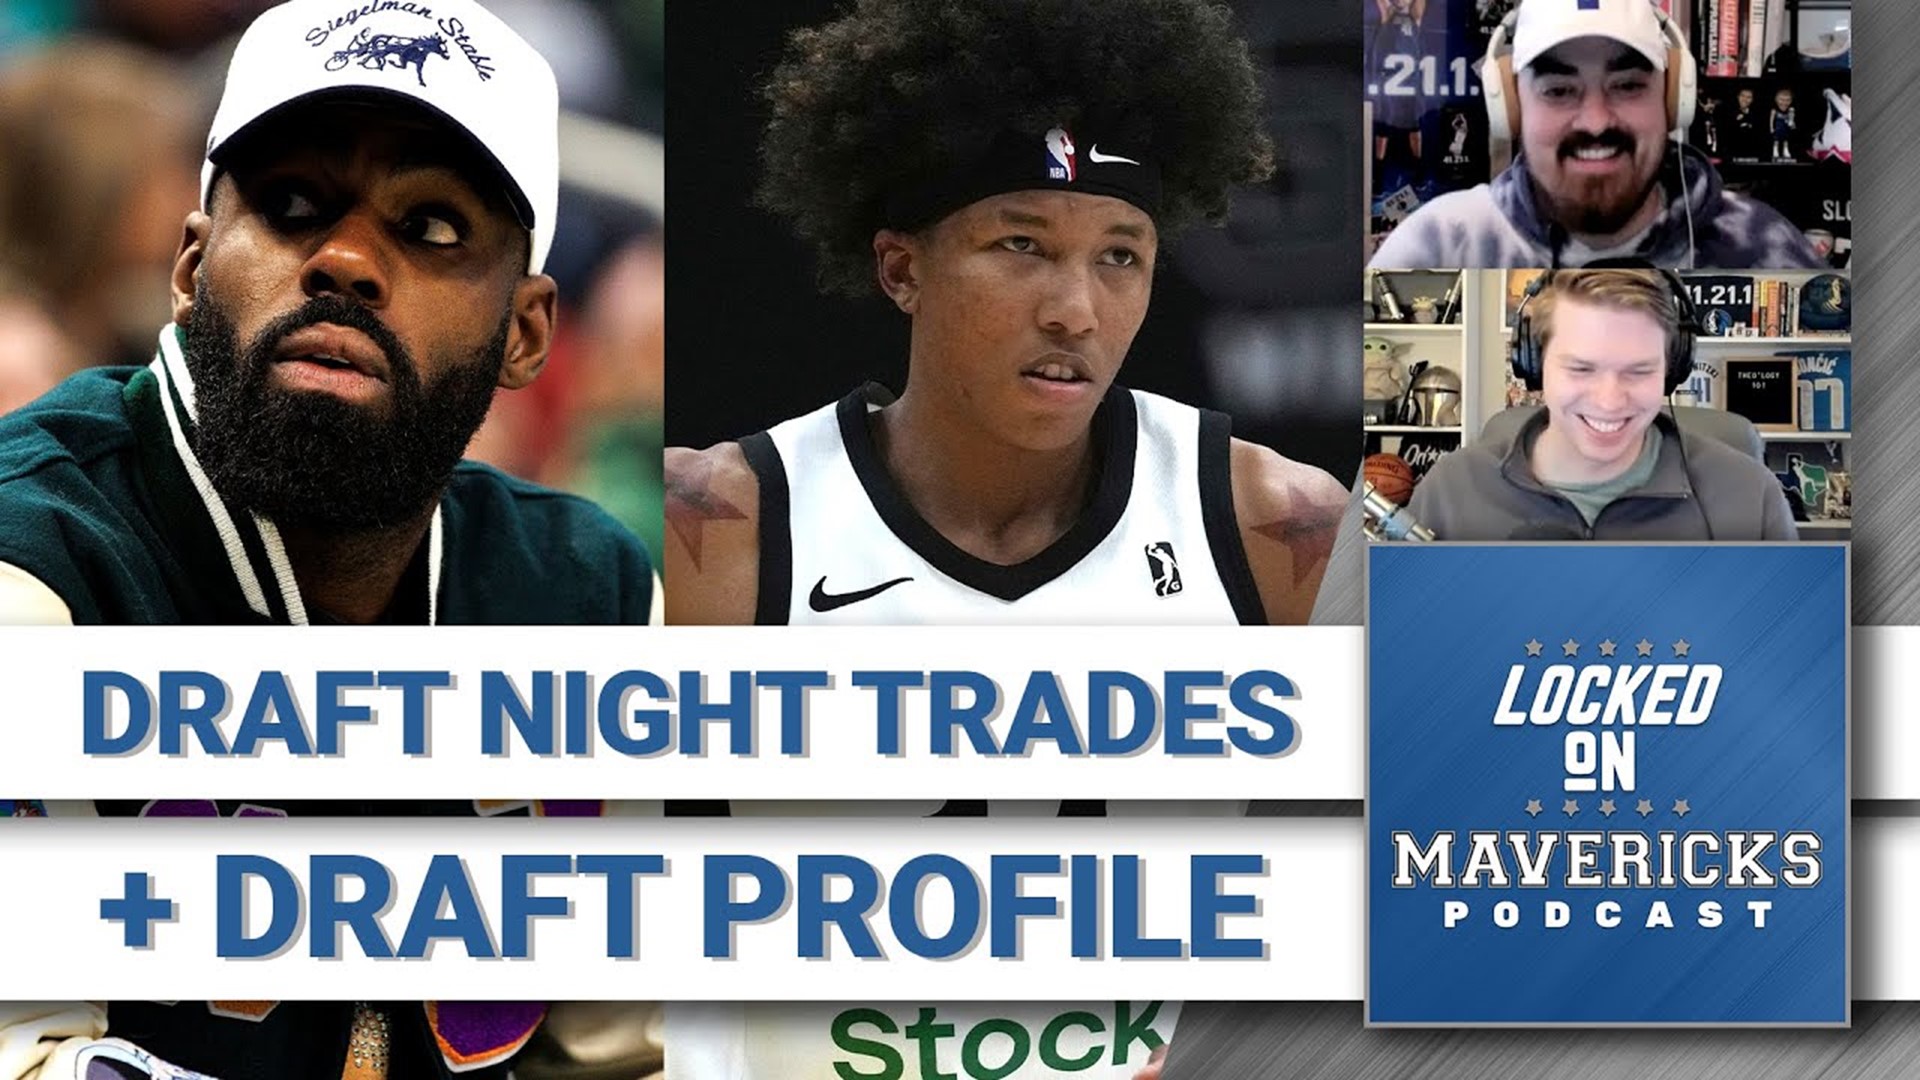 The Dallas Mavericks have the 26th pick in the 2022 NBA Draft, what kind of trades could they pull off on Draft night?